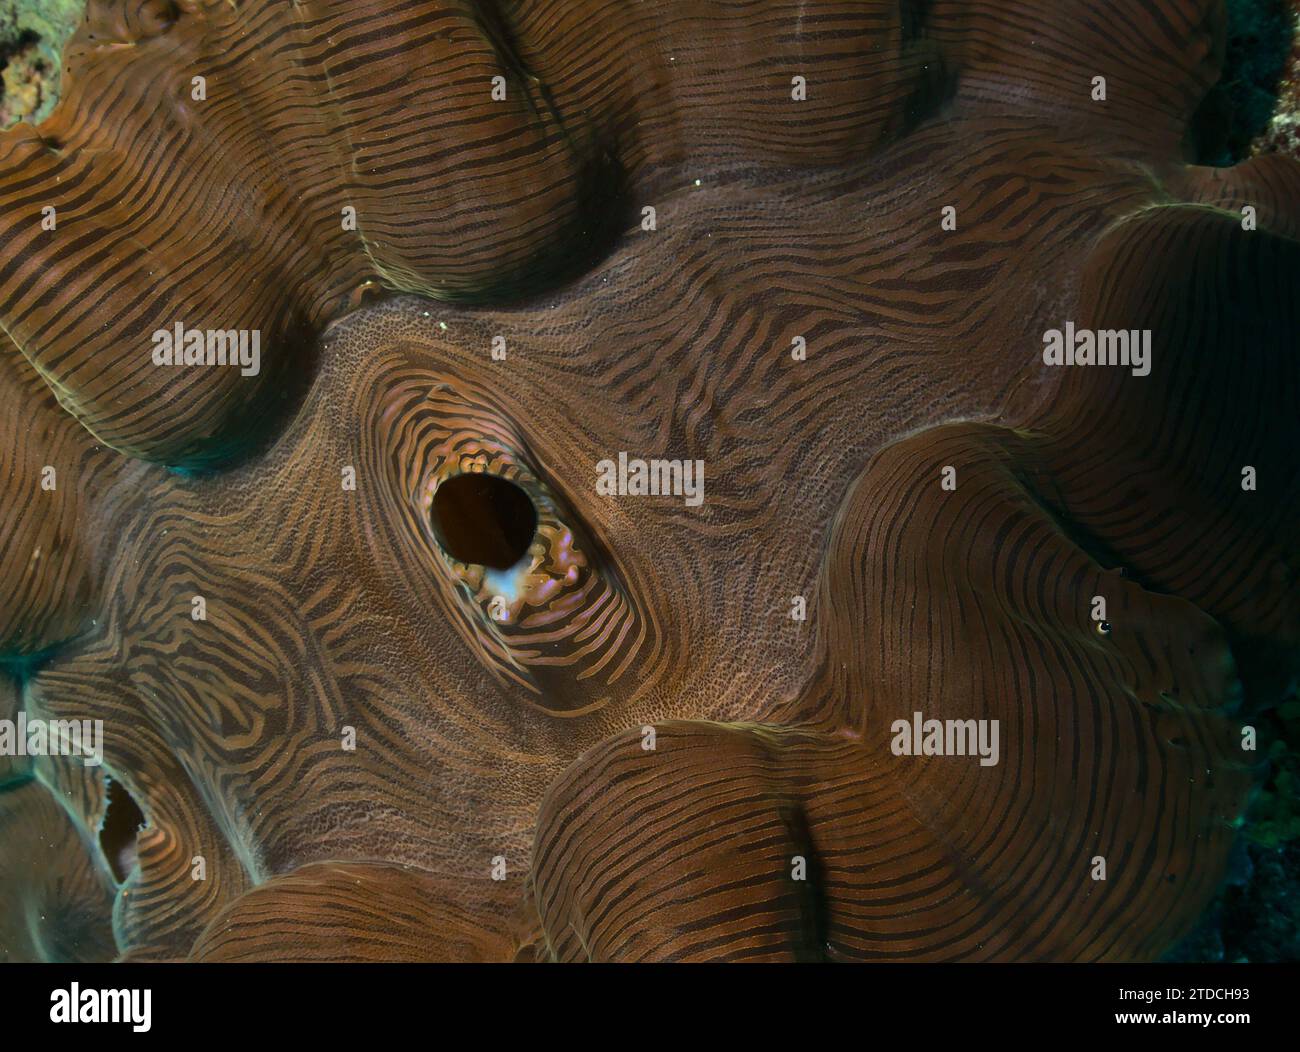 close-up of the colourful mantle of a smooth giant clam in the coral reefs of watamu marine park, kenya Stock Photo